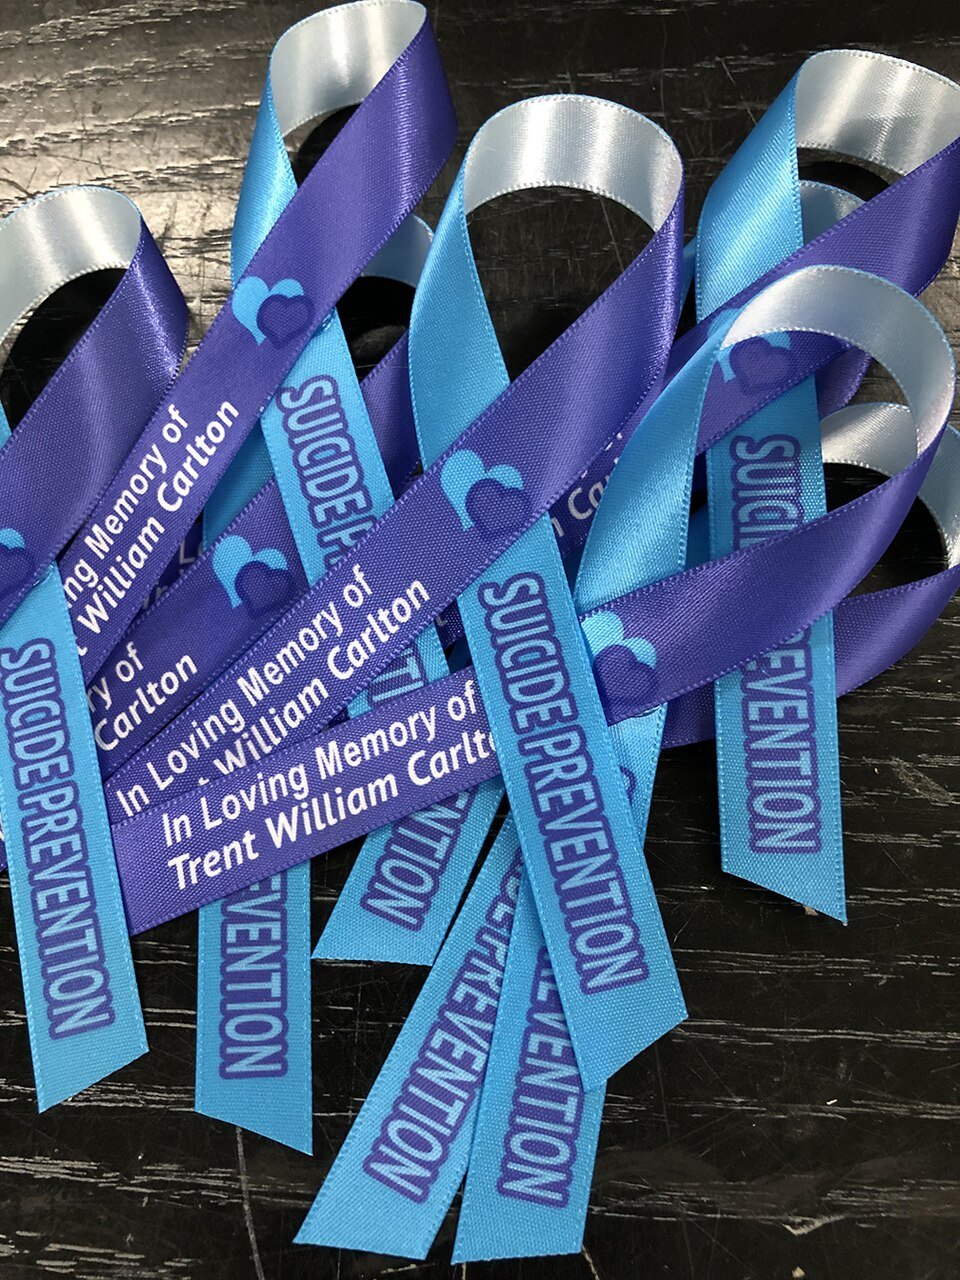 Suicide Awareness Ribbon Personalized (Purple/Teal) - Pack of 10